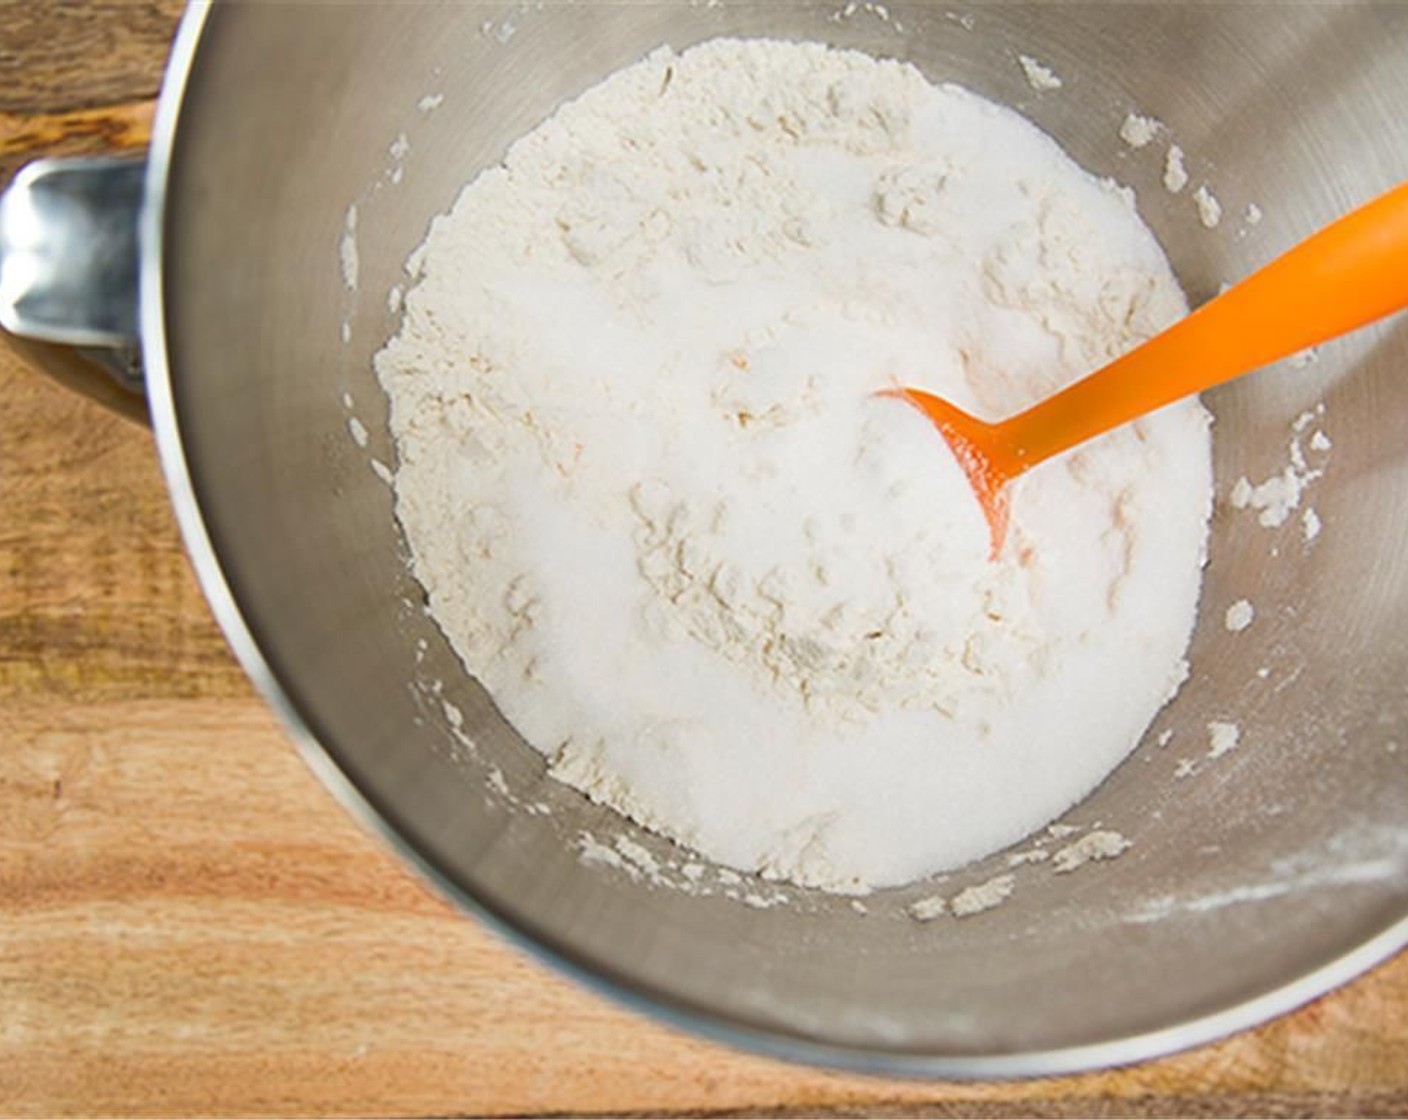 step 3 In a large bowl sift together All-Purpose Flour (1 3/4 cups), Salt (1/2 tsp), and Baking Powder (1 Tbsp). When dry ingredients are sifted, add Granulated Sugar (1 1/2 cups) and mix.